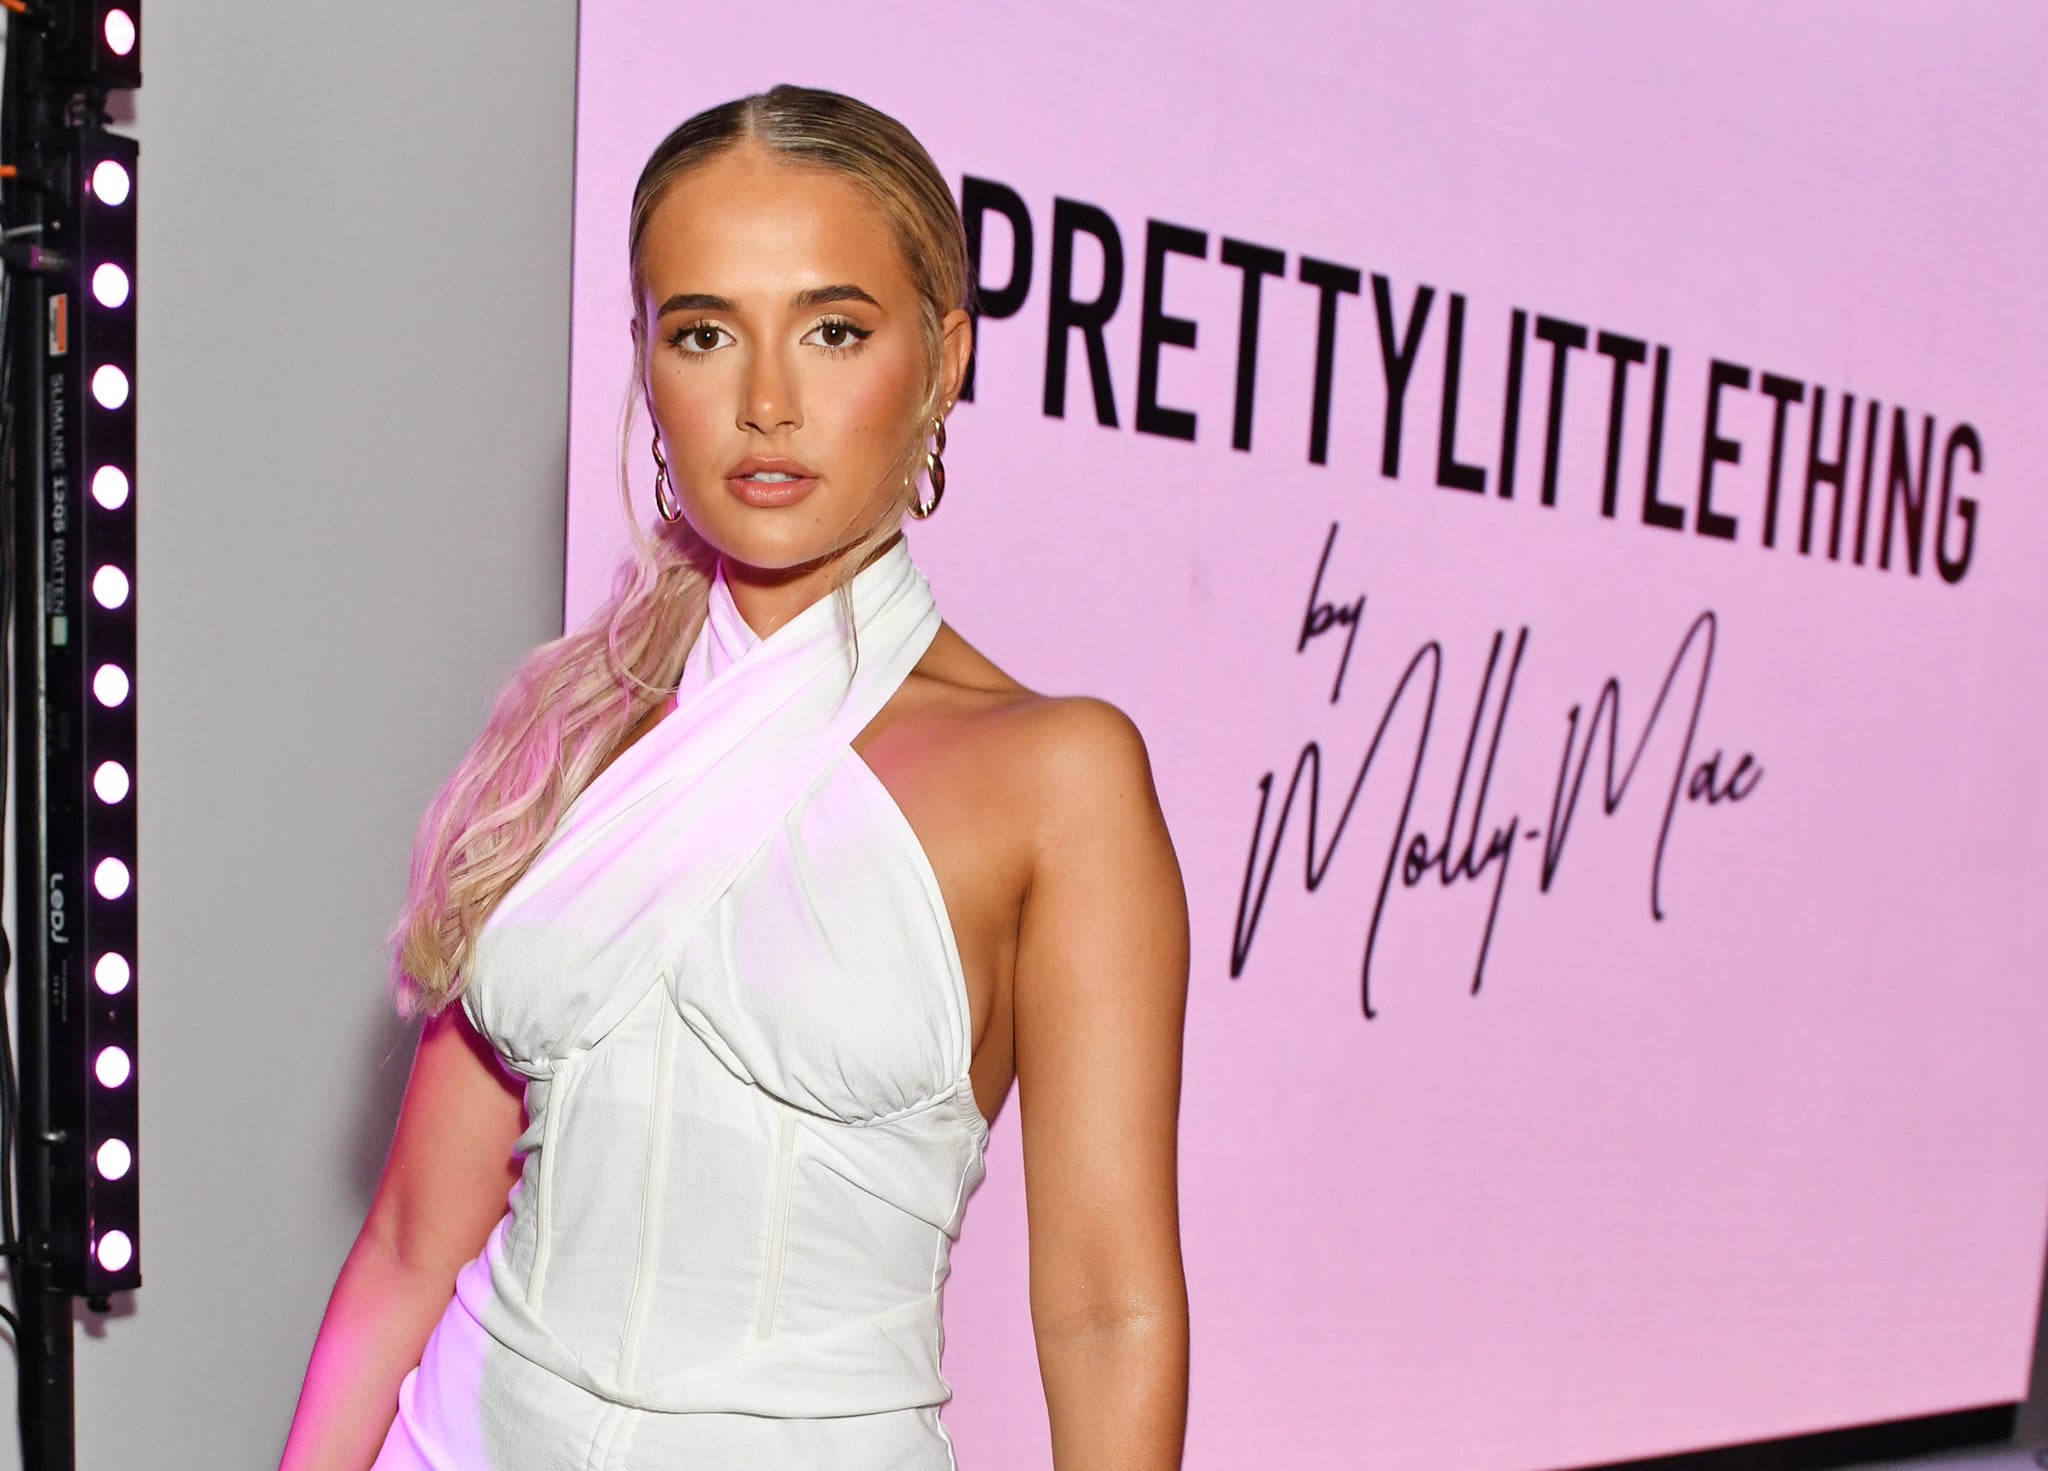 LONDON, ENGLAND - AUGUST 26:   Molly-Mae Hague attends the launch party of Molly Mae's Pretty Little Thing collection at Novikov on August 26, 2021 in London, England.  (Photo by David M. Benett/Dave Benett/Getty Images for Pretty Little Thing)